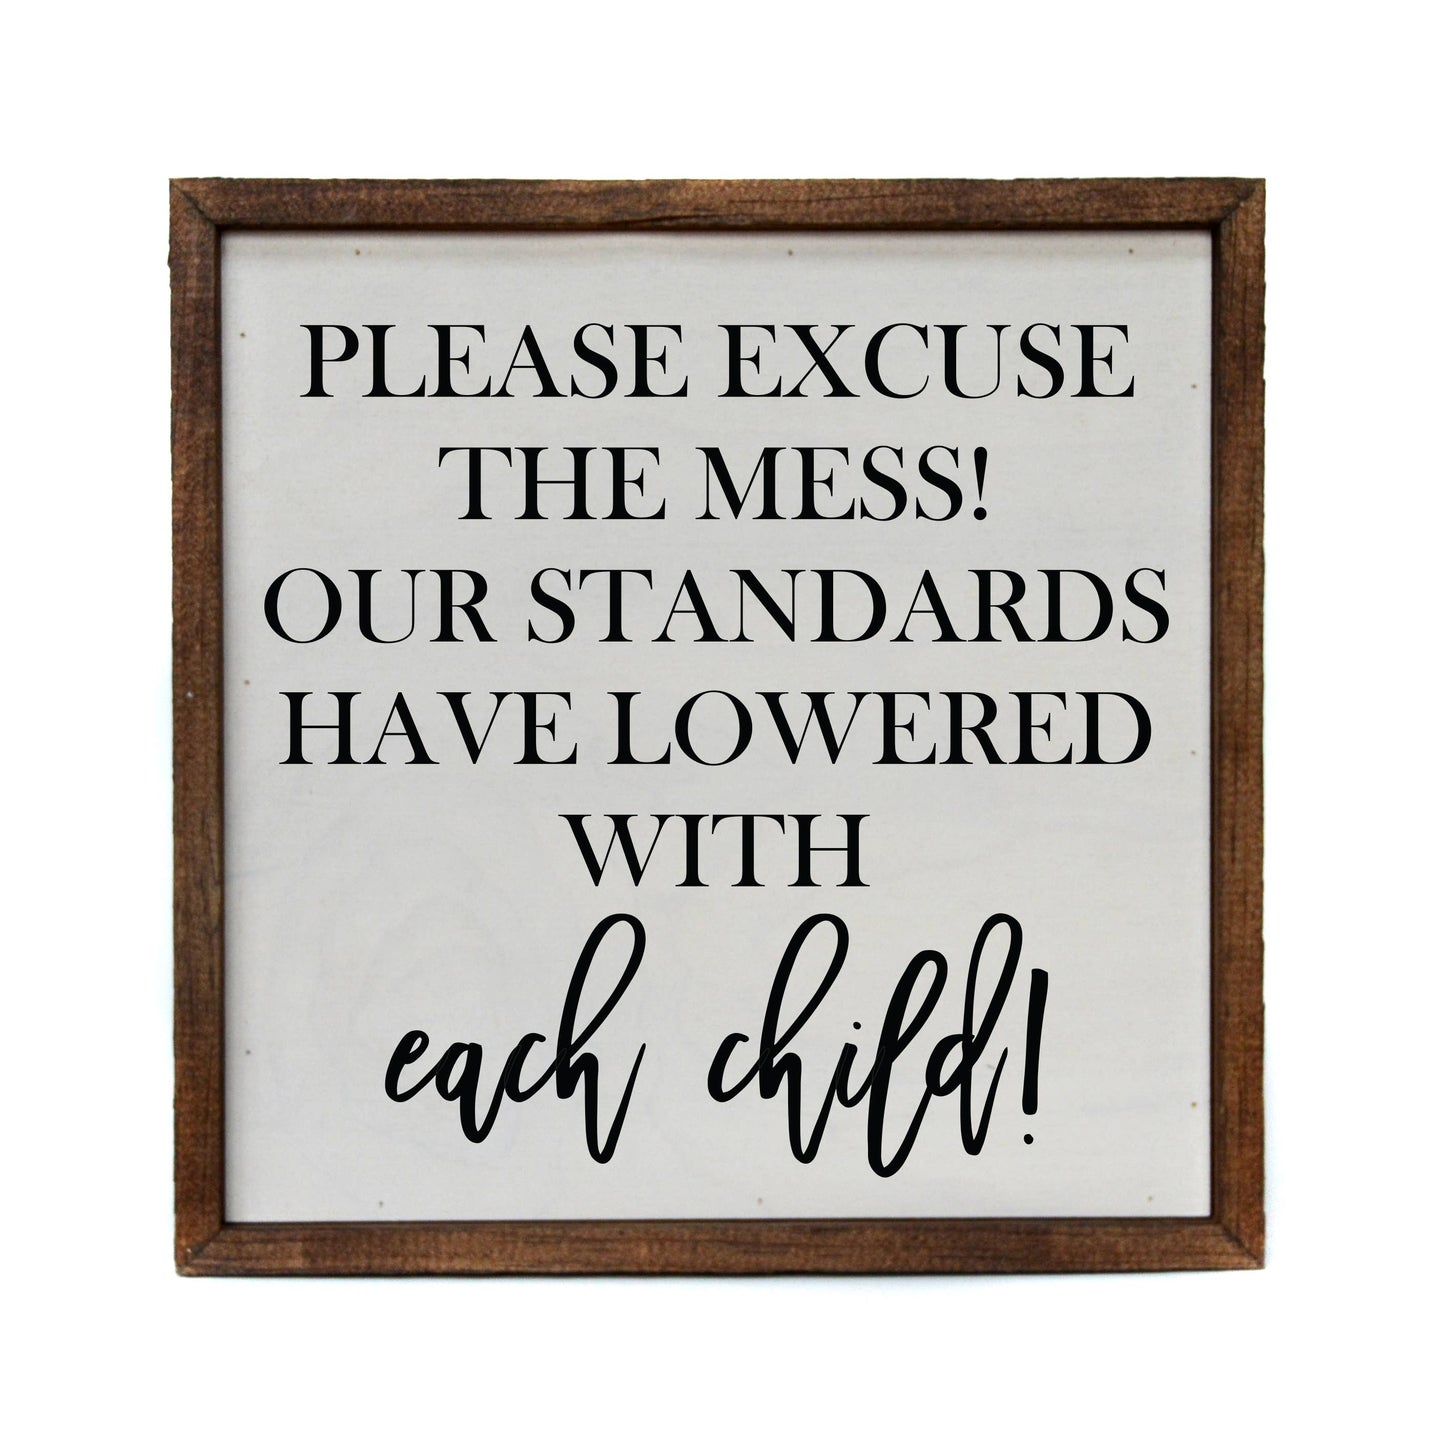 10x10 Please Excuse The Mess Sign